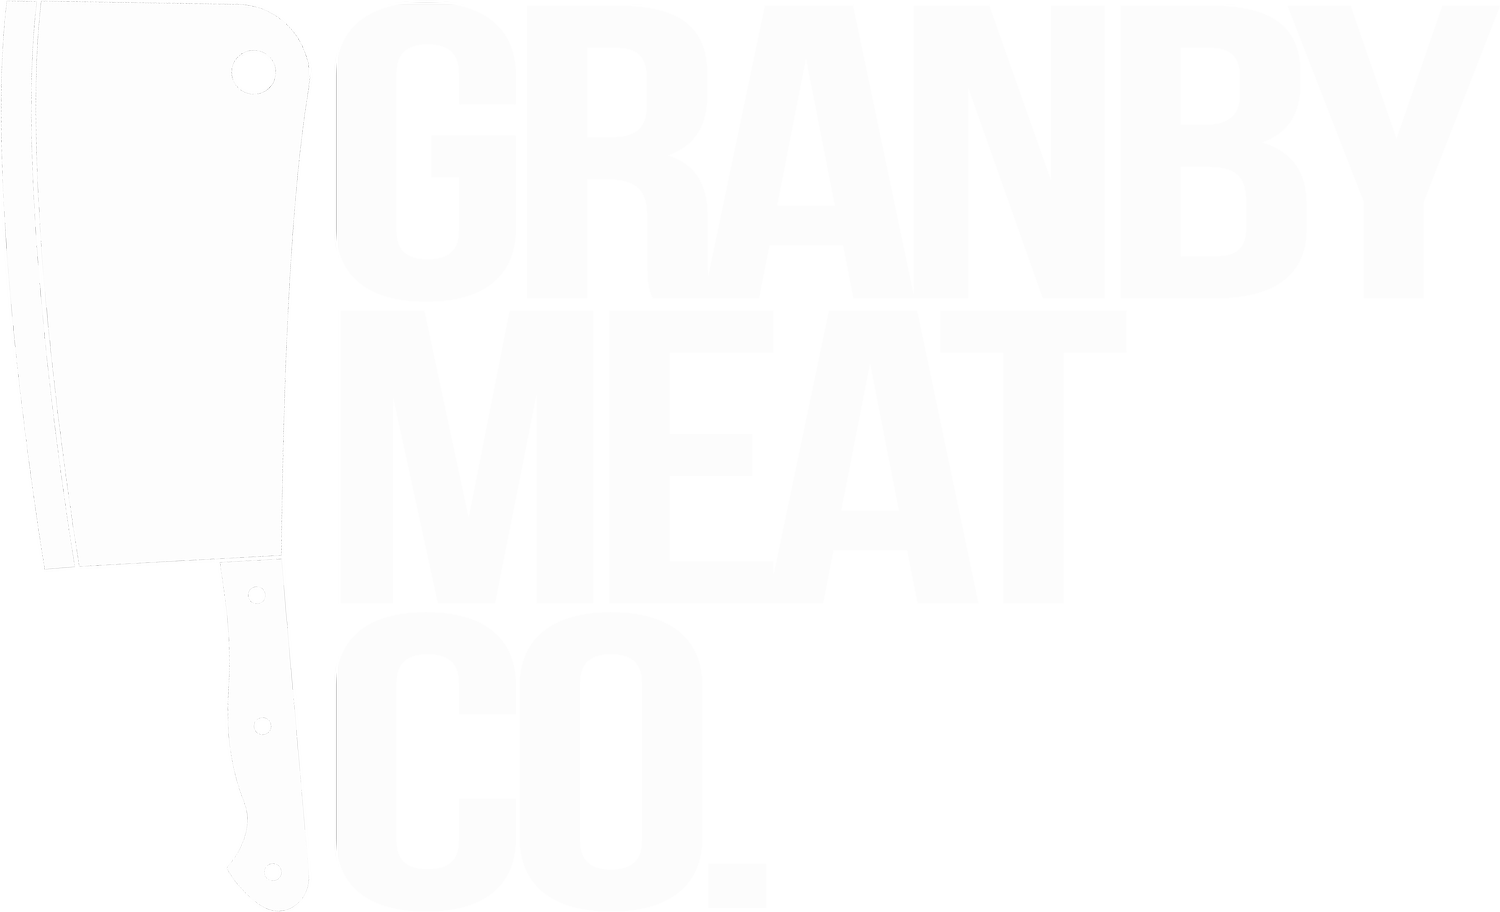 Granby Meat Company